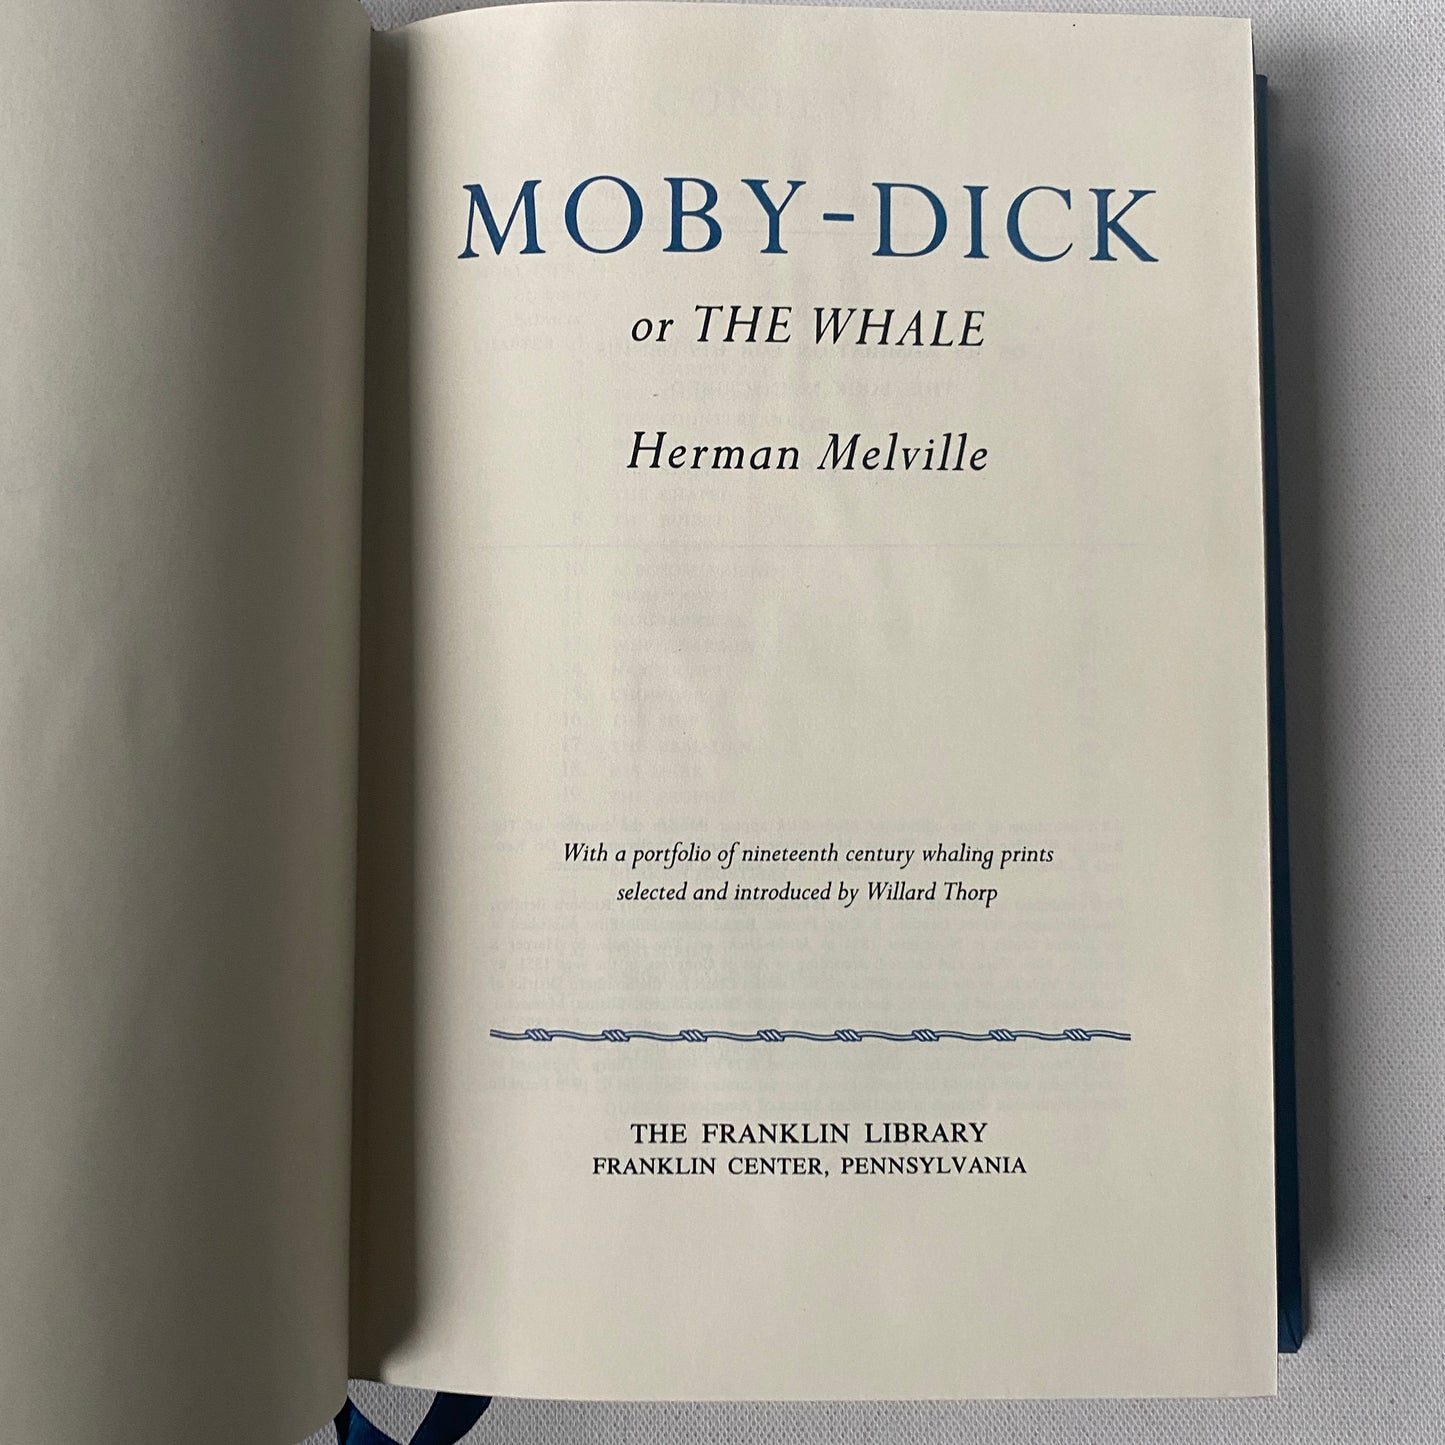 Vintage Moby Dick by Herman Melville, The Franklin Library